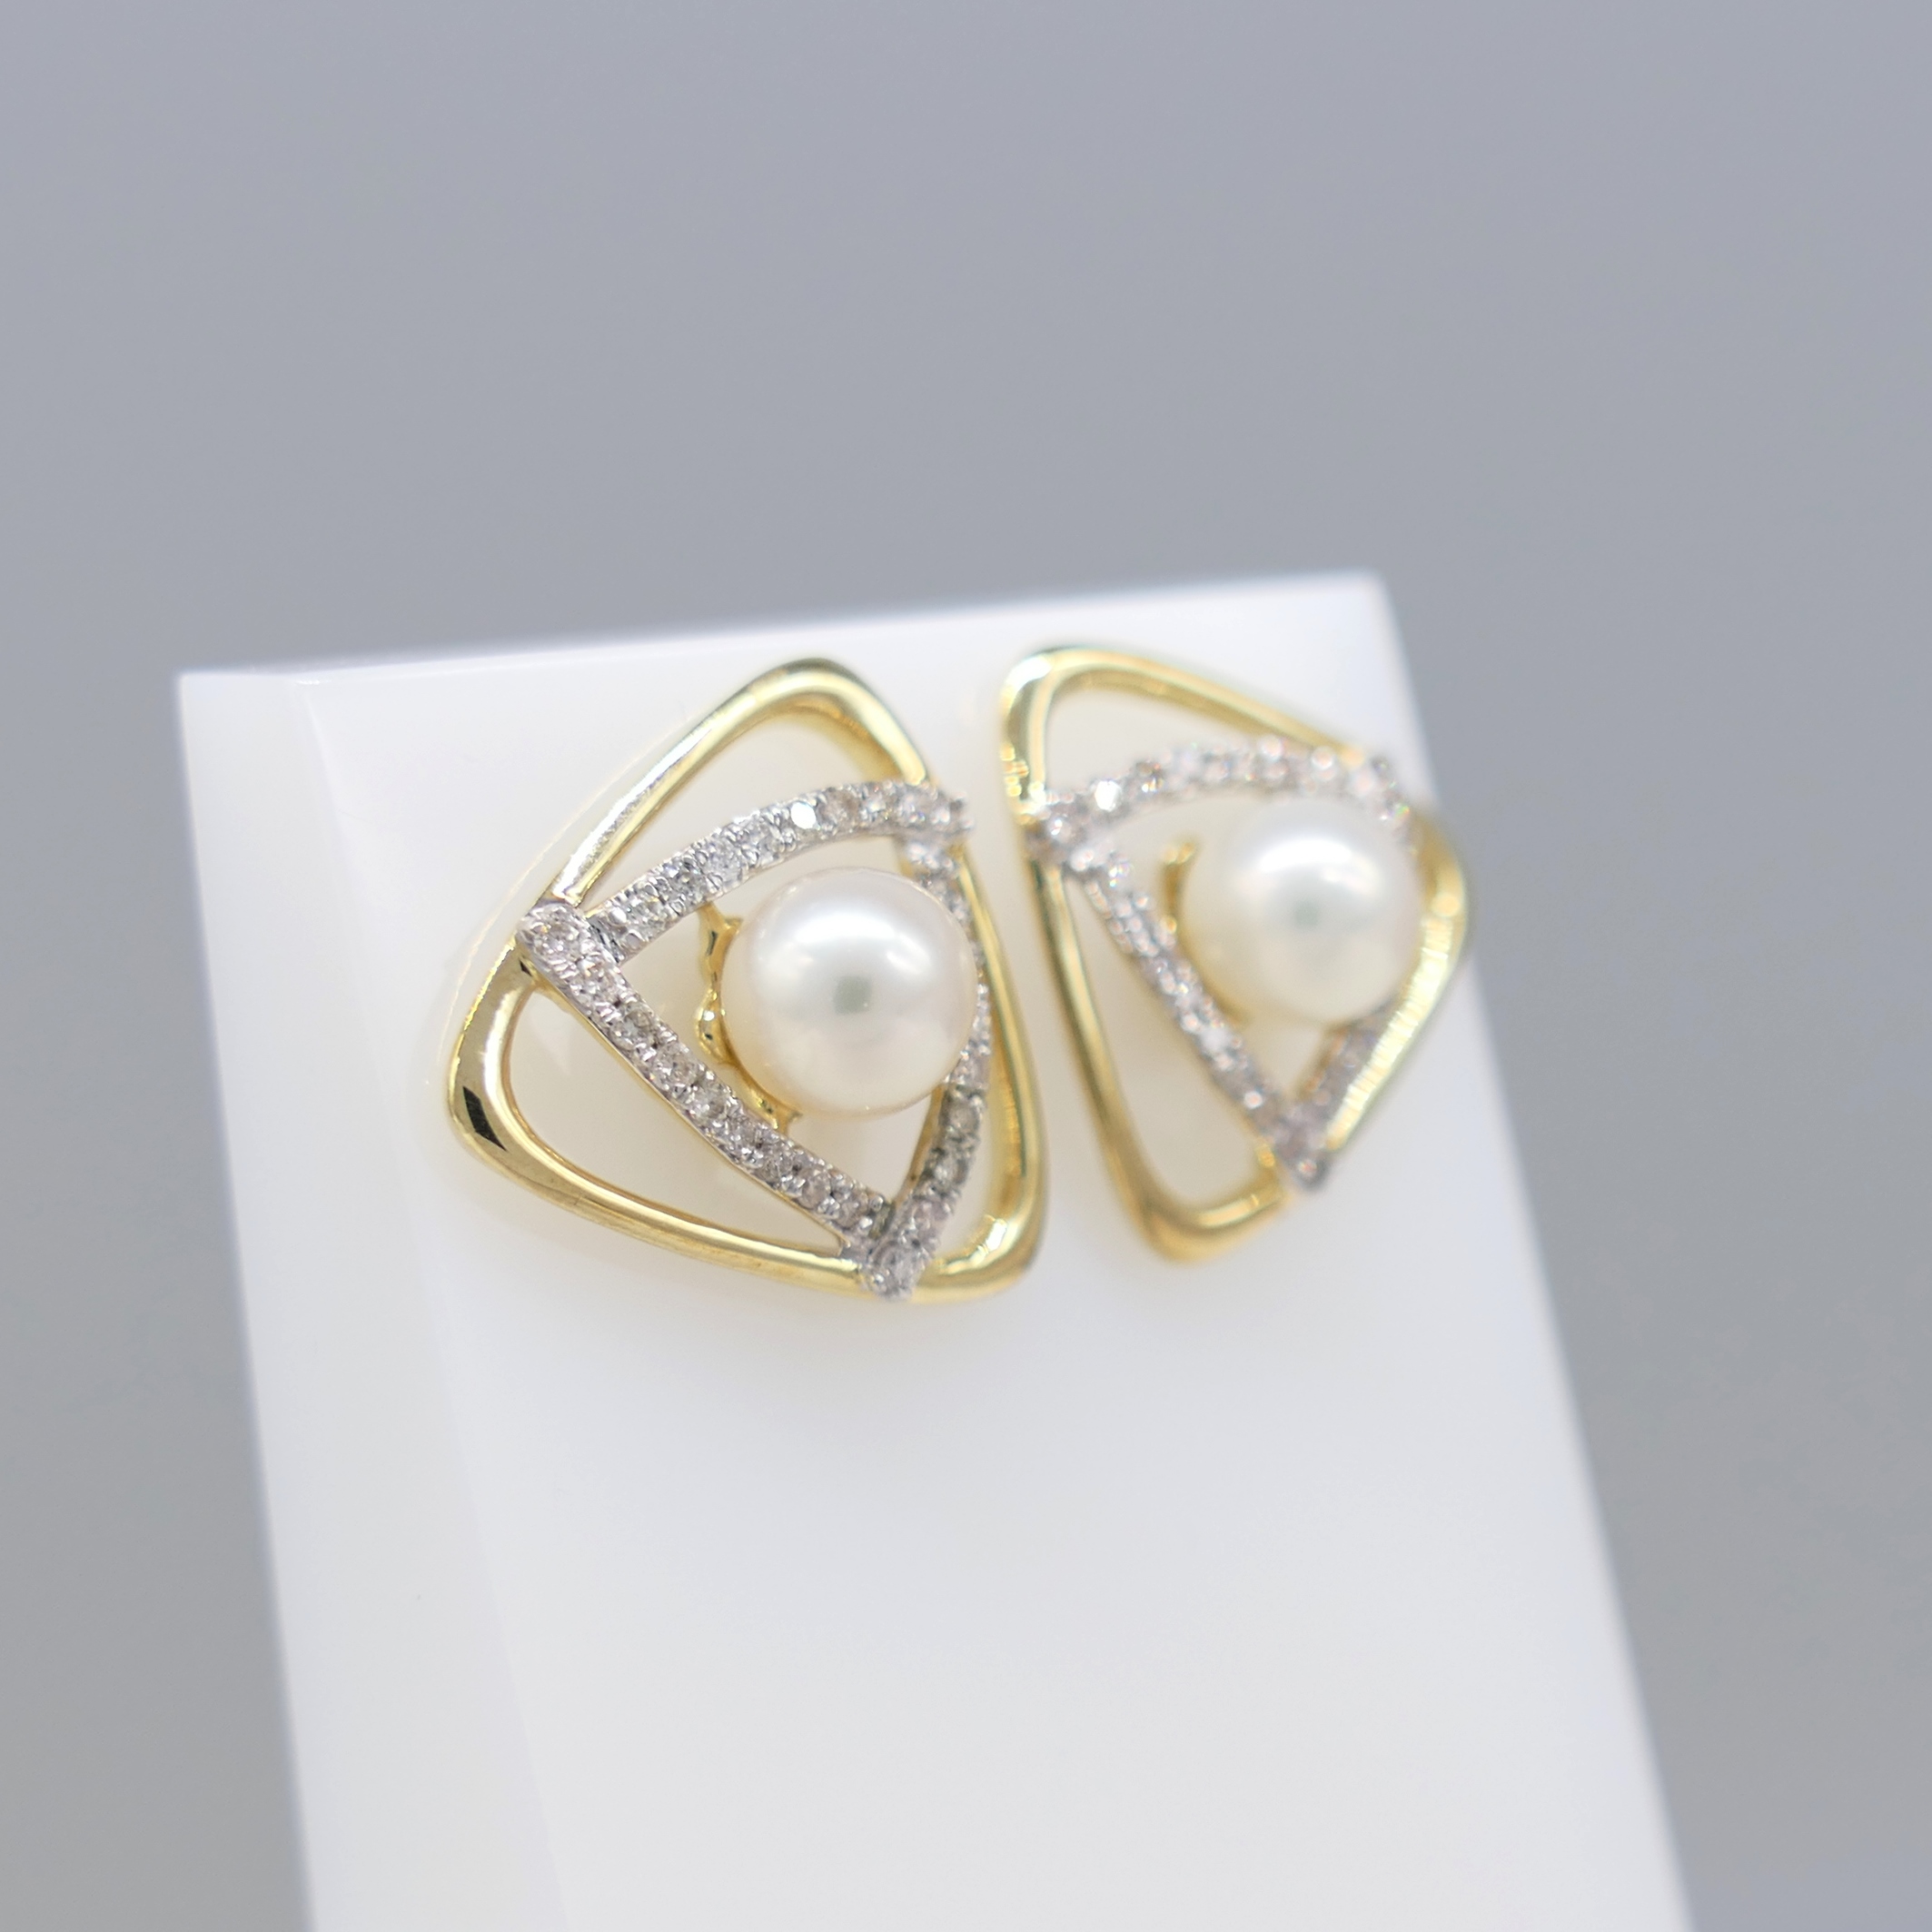 Pair of 9ct Yellow Gold Triangular Ear Studs Set With Cultured Pearls and Diamonds, Boxed - Image 2 of 5